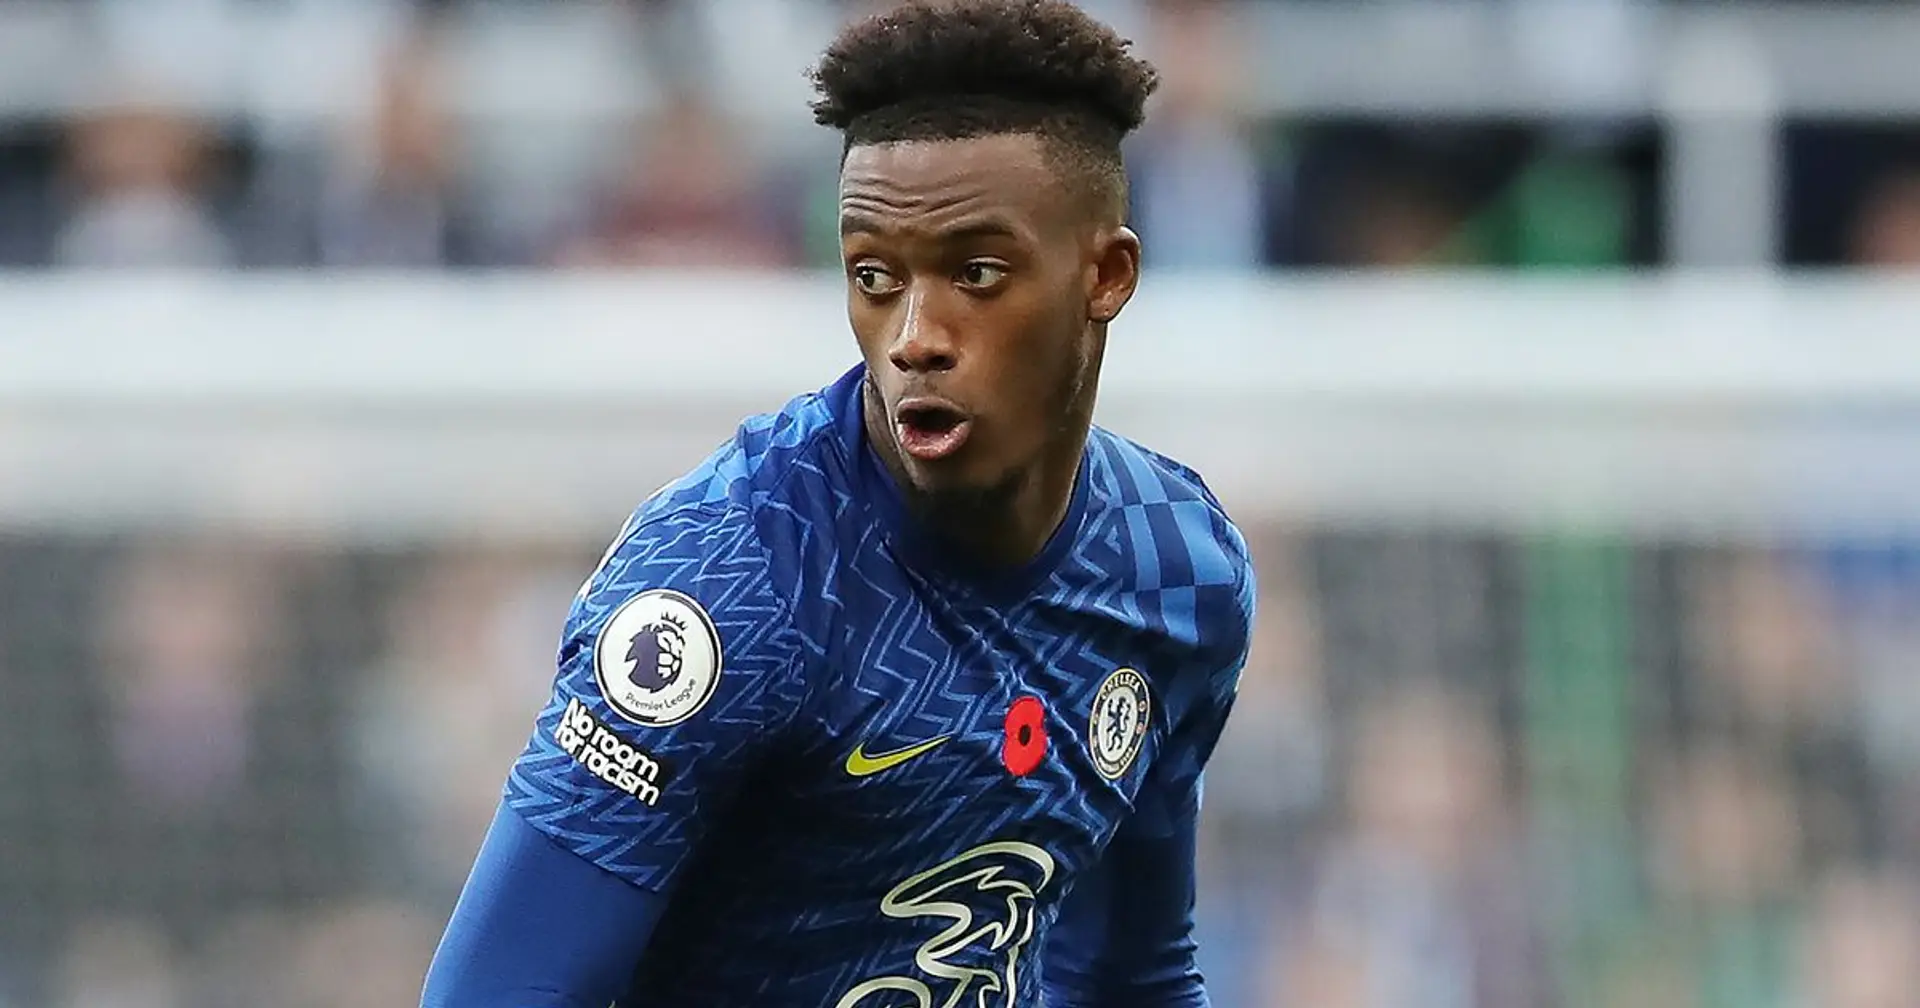 6 ground duels won, 4 successful dribbles & more: 9 numbers highlight Hudson-Odoi's great Malmo showing